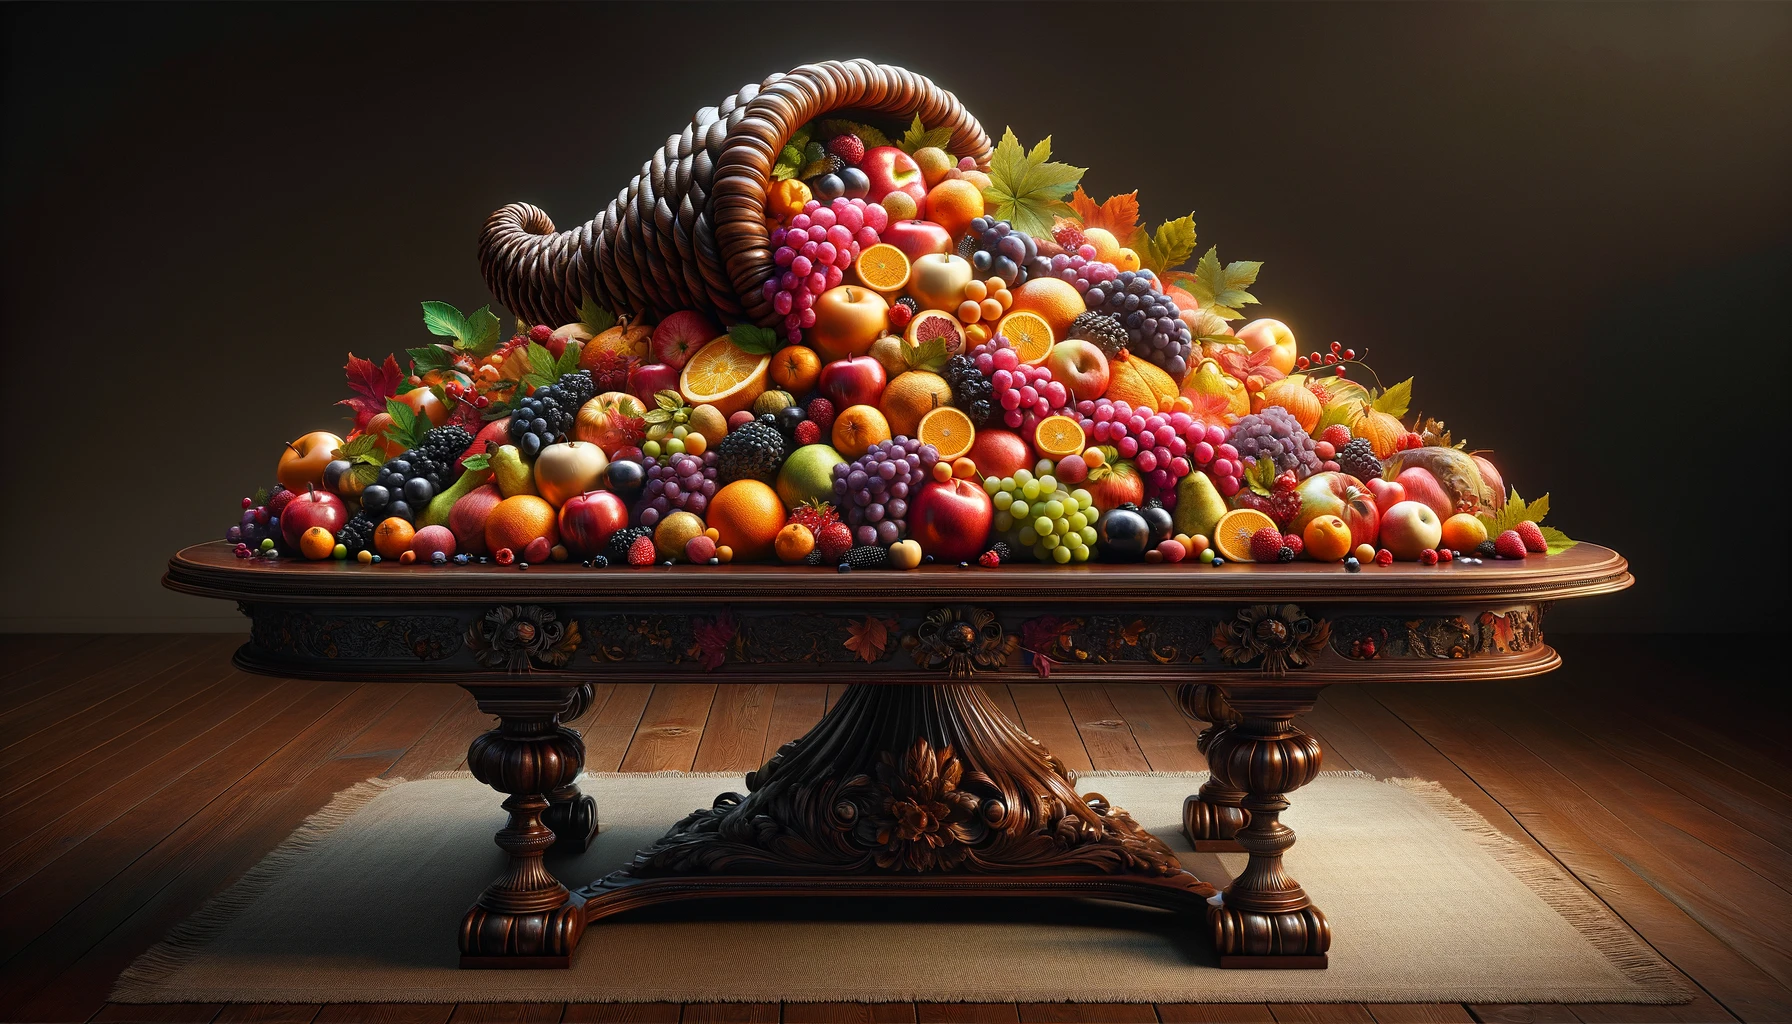 An image showcasing a richly adorned wooden table adorned with a vibrant overflowing cornucopia of various fruits symbolizing abundance and fulfill